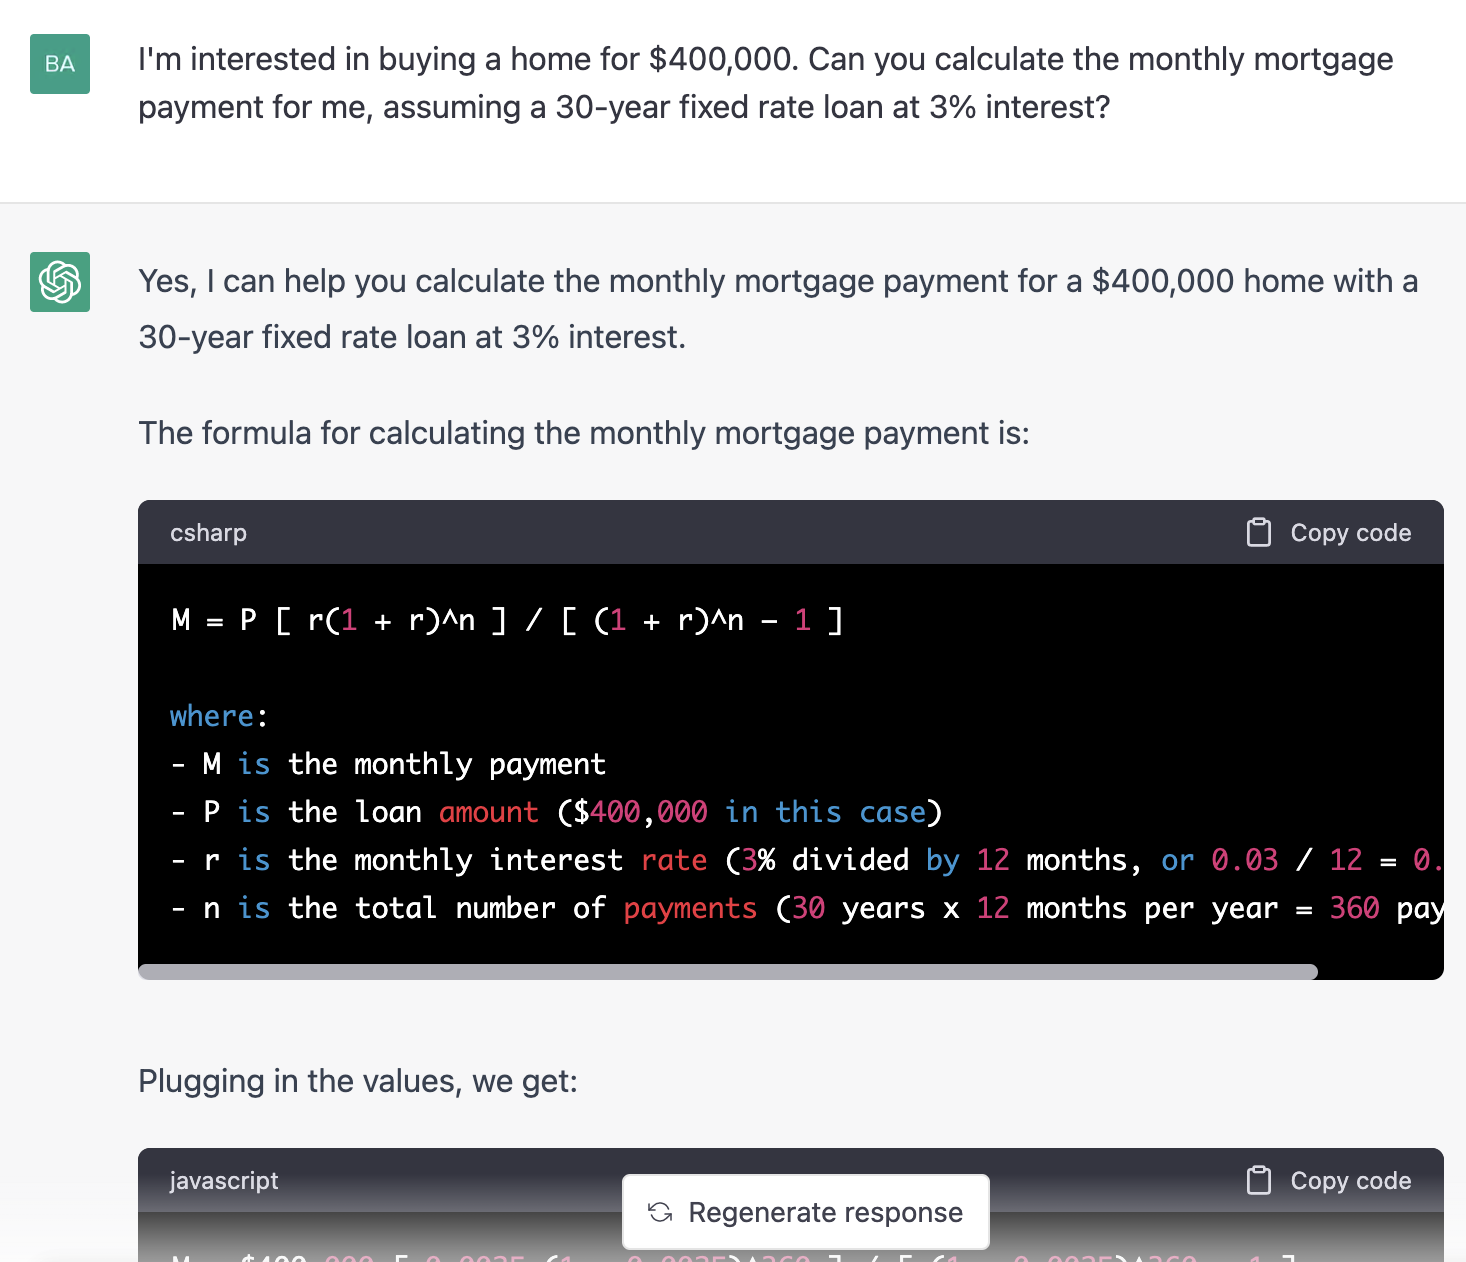 ChatGPT prompt about calculating the monthly mortgage payment